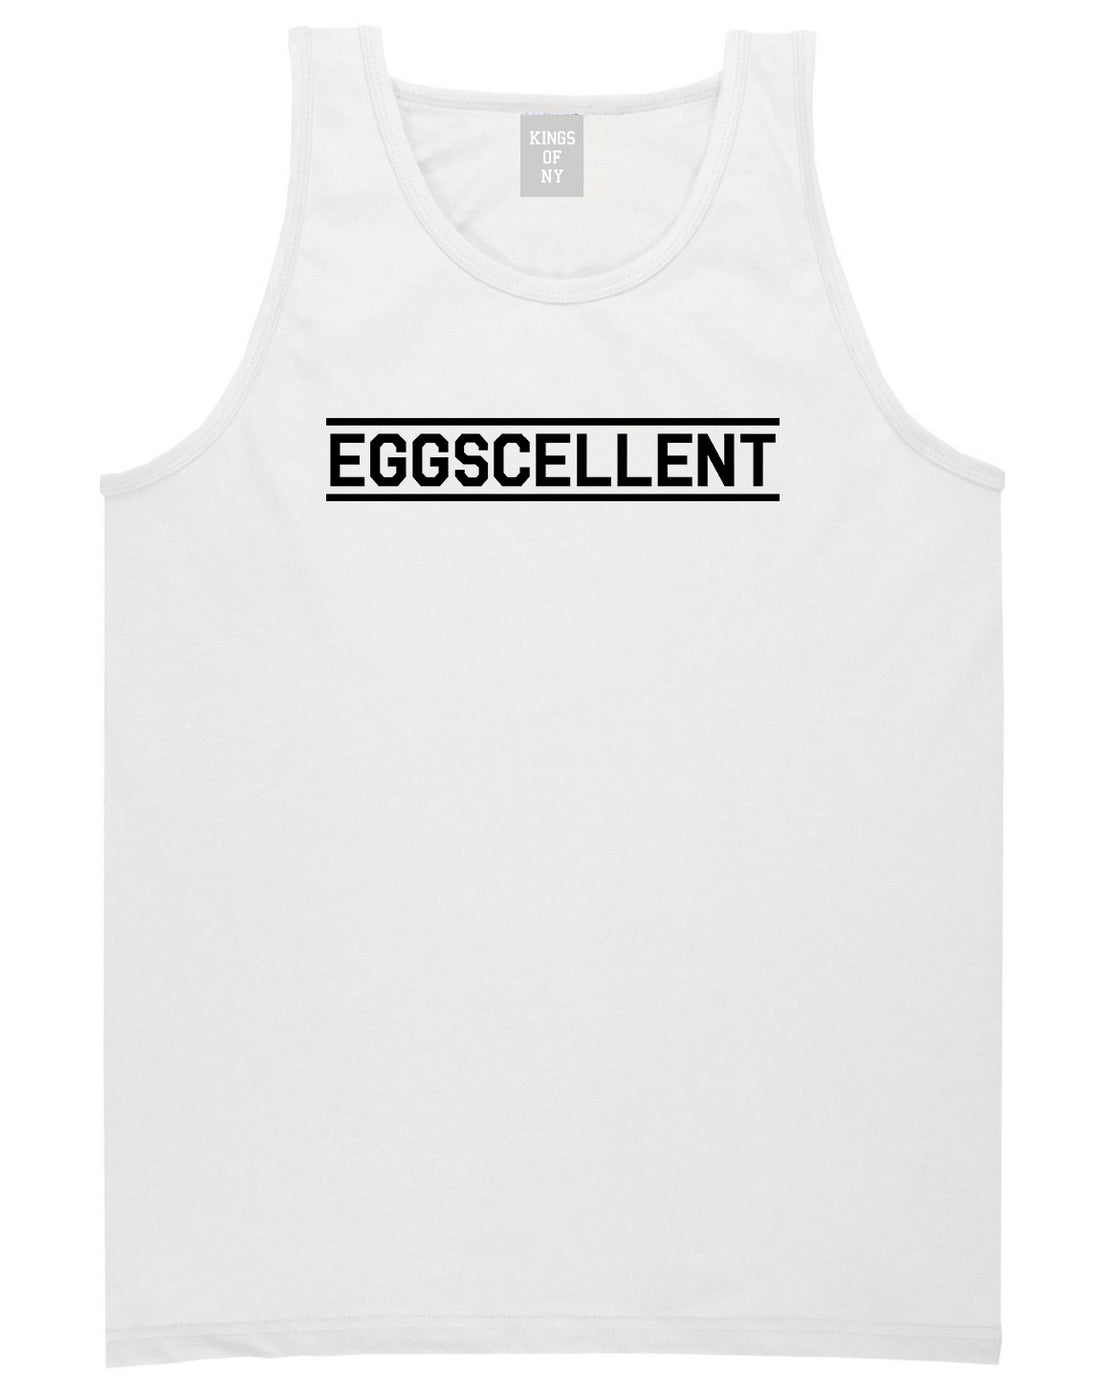 Eggscellent_Funny Mens White Tank Top Shirt by Kings Of NY